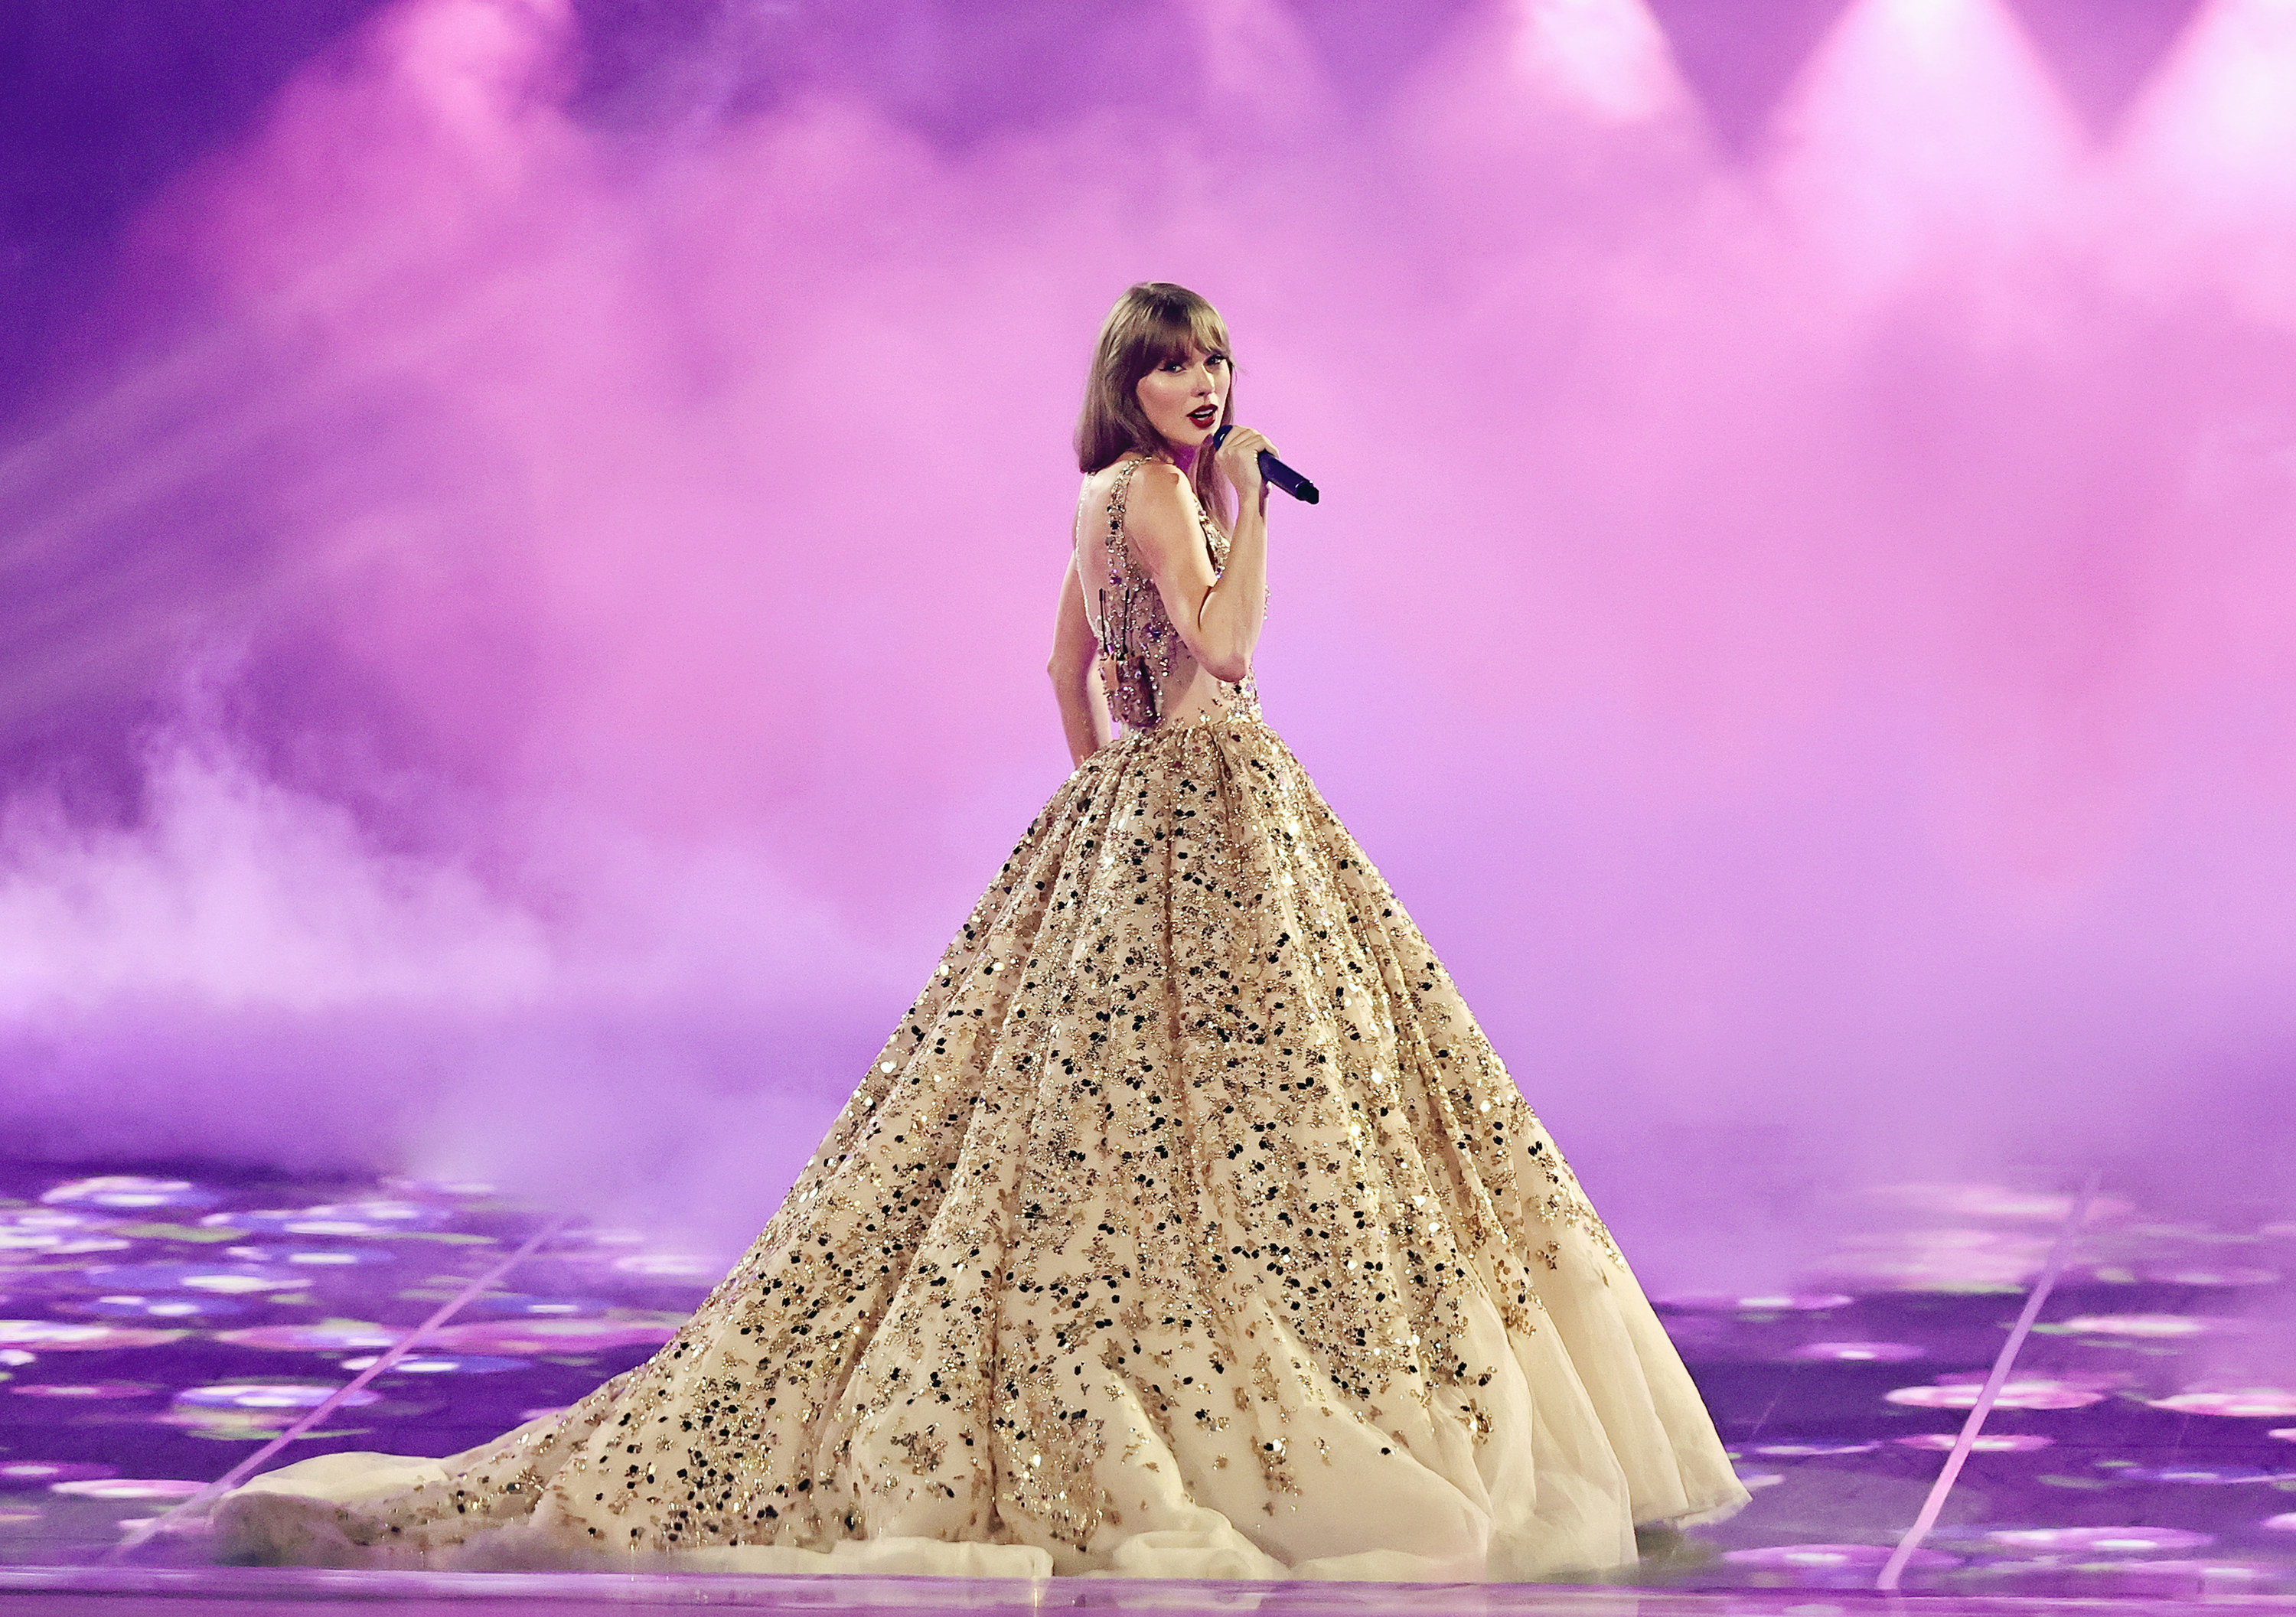 Taylor Swift wearing a shimmering ball gown